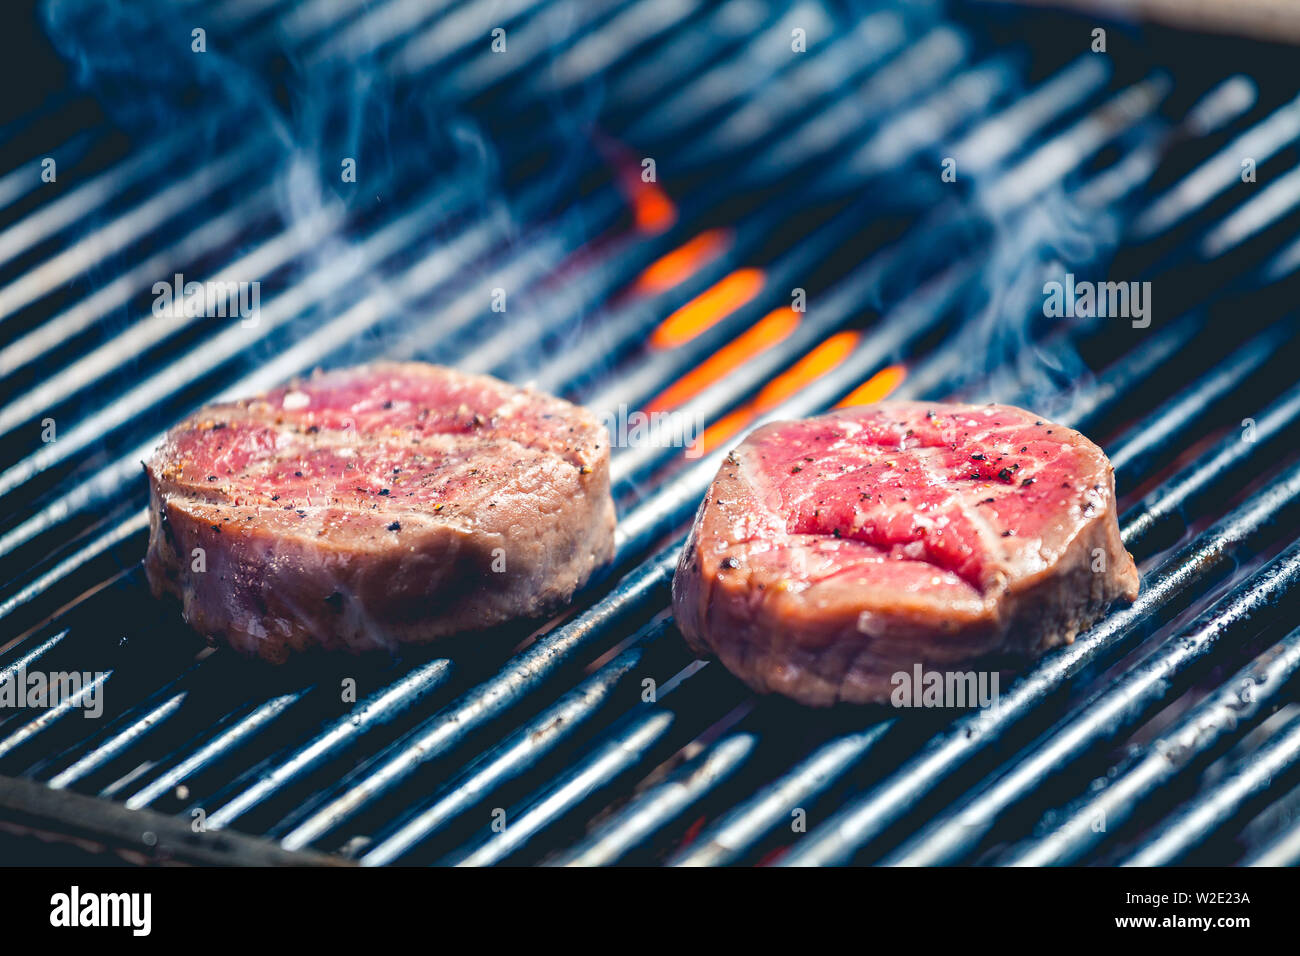 Delicious steak on the grill close up Stock Photo